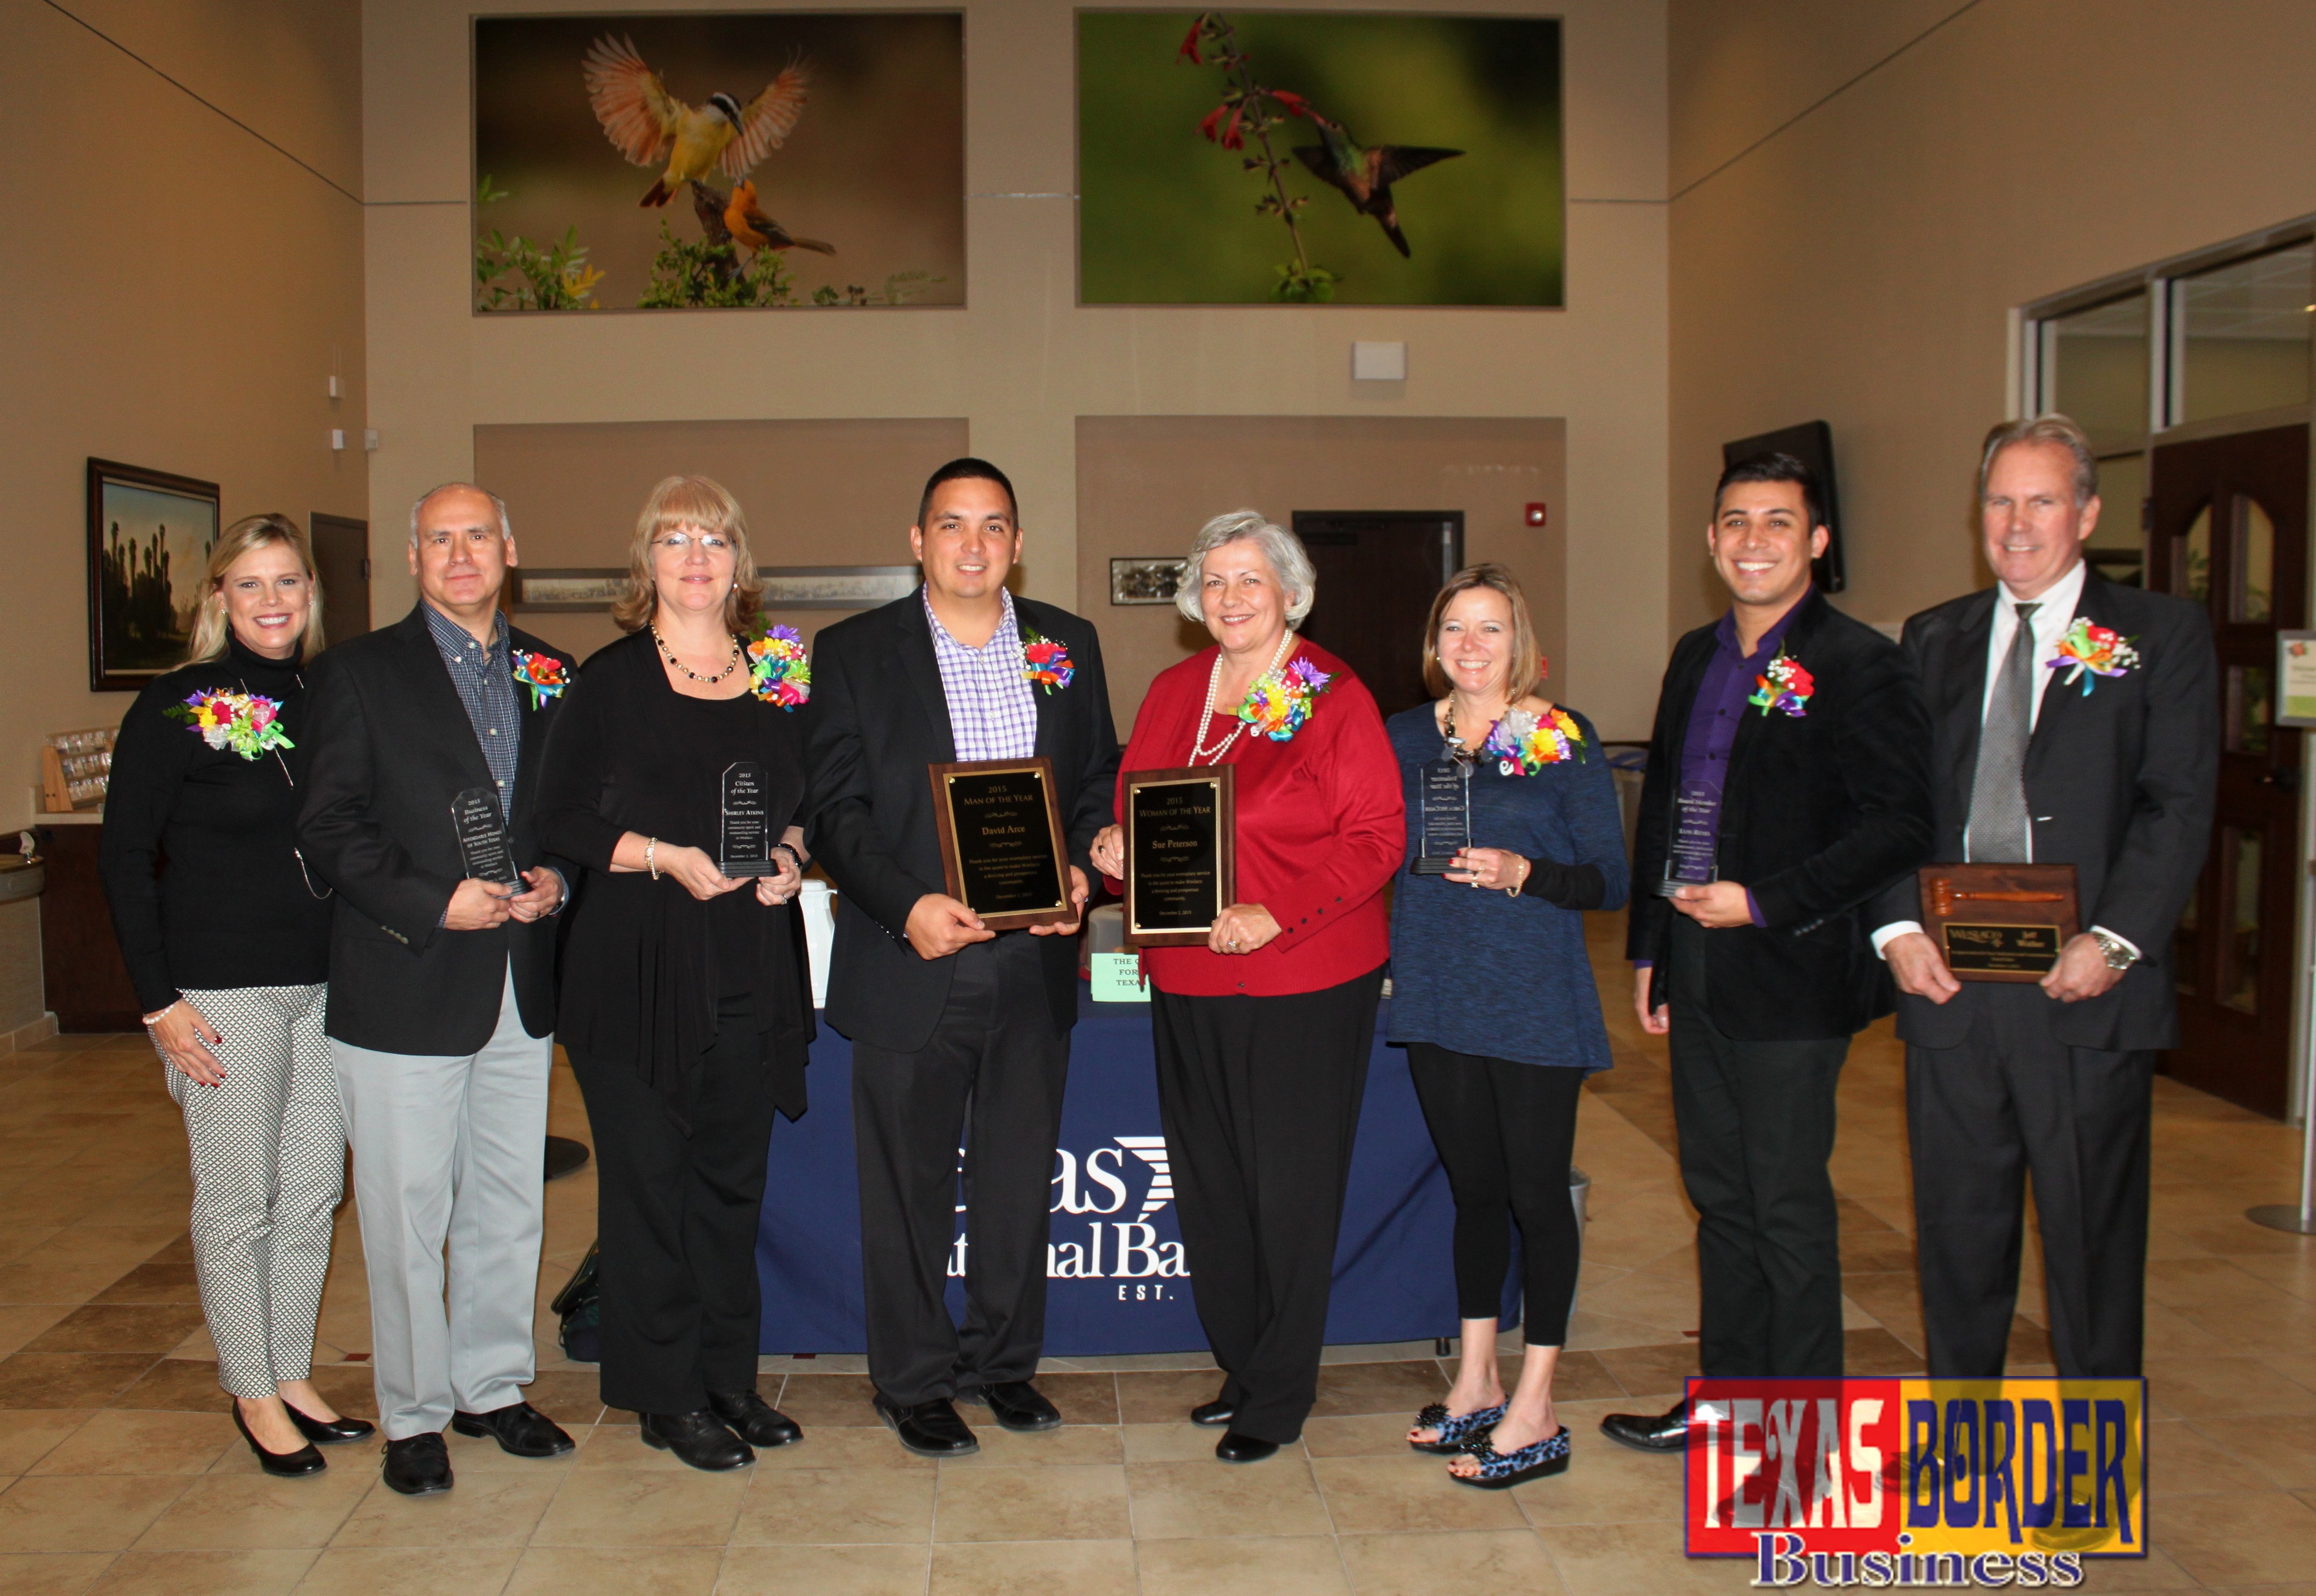 2015 Honorees at the Weslaco Chamber Annual Luncheon. L-R: Melissa Neuhaus, Board Chair 2015-2016; Bobby Calvillo, representing Business of the Year Affordable Homes of South Texas; Rise Morris, Citizen of the Year, (posthumously awarded to Shirley Atkins); Man of the Year David Arce; Woman of the Year Sue Peterson; Volunteer of the Year Carla McCaleb; Board Member of the Year Luis Reyes and Jeff Walker, Board Chair 2014-2015.